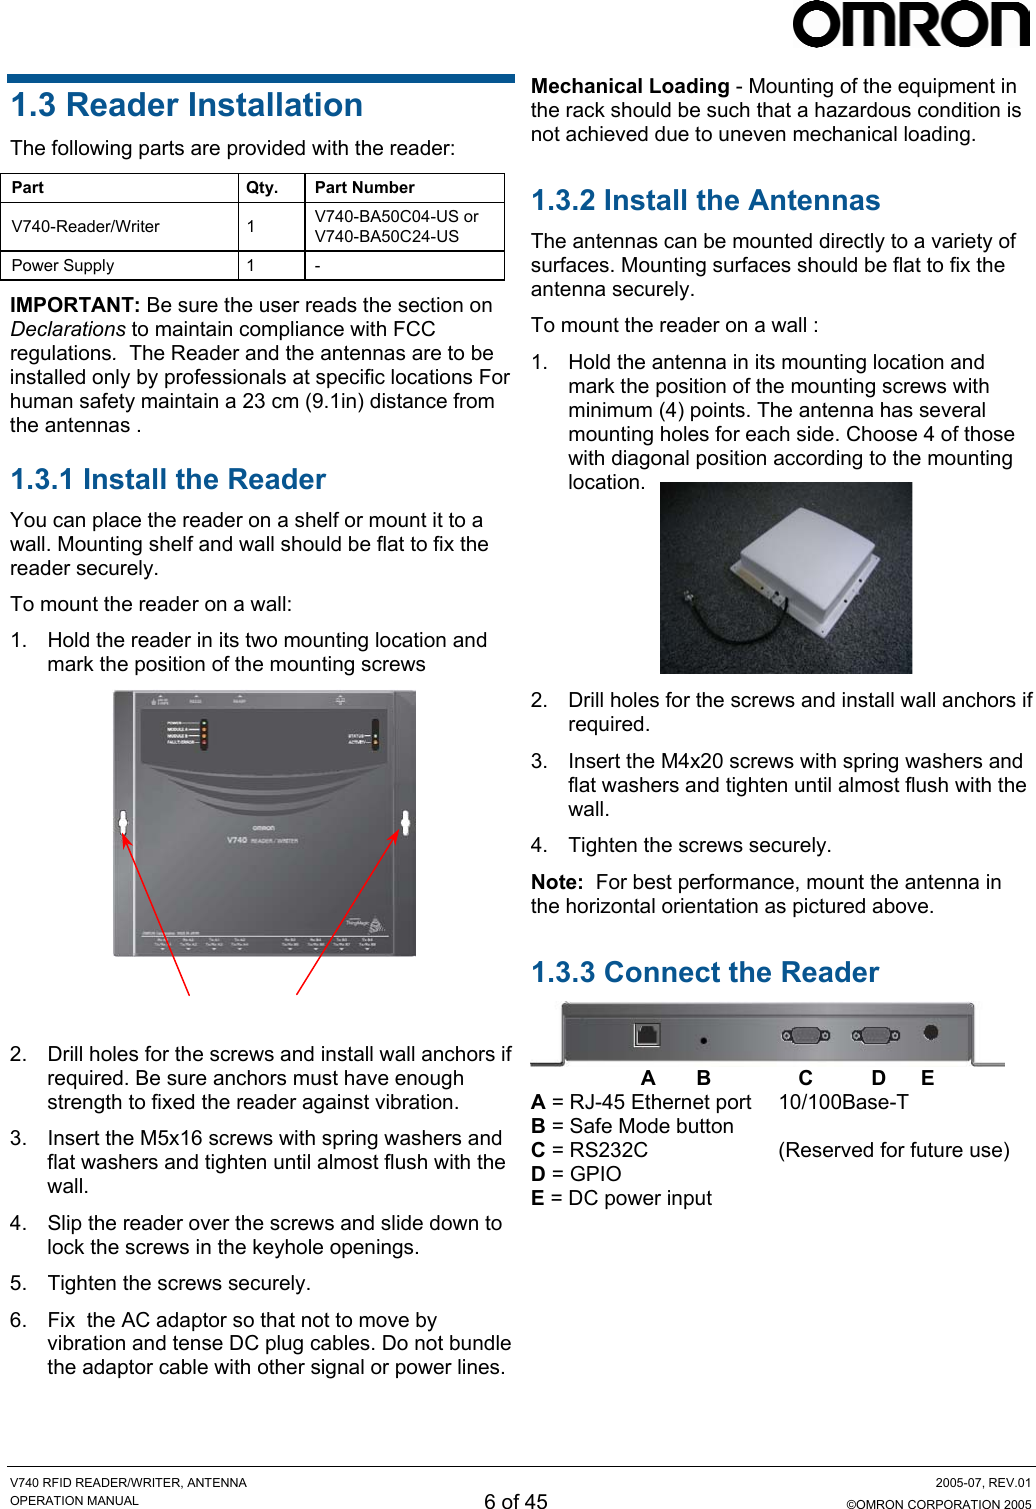     V740 RFID READER/WRITER, ANTENNA  2005-07, REV.01 OPERATION MANUAL 6 of 45  ©OMRON CORPORATION 2005 Mechanical Loading - Mounting of the equipment in the rack should be such that a hazardous condition is not achieved due to uneven mechanical loading. 1.3 Reader Installation The following parts are provided with the reader: Part Qty. Part Number V740-Reader/Writer 1 V740-BA50C04-US or V740-BA50C24-US Power Supply  1  - 1.3.2 Install the Antennas The antennas can be mounted directly to a variety of surfaces. Mounting surfaces should be flat to fix the antenna securely. IMPORTANT: Be sure the user reads the section on Declarations to maintain compliance with FCC regulations.  The Reader and the antennas are to be installed only by professionals at specific locations For human safety maintain a 23 cm (9.1in) distance from the antennas . To mount the reader on a wall : 1.  Hold the antenna in its mounting location and mark the position of the mounting screws with minimum (4) points. The antenna has several mounting holes for each side. Choose 4 of those with diagonal position according to the mounting location. 1.3.1 Install the Reader  You can place the reader on a shelf or mount it to a wall. Mounting shelf and wall should be flat to fix the reader securely.    To mount the reader on a wall:  1.  Hold the reader in its two mounting location and mark the position of the mounting screws   2.  Drill holes for the screws and install wall anchors if required.    3.  Insert the M4x20 screws with spring washers and flat washers and tighten until almost flush with the wall. 4.  Tighten the screws securely.  Mounting holes  Note:  For best performance, mount the antenna in the horizontal orientation as pictured above. 1.3.3 Connect the Reader  2.  Drill holes for the screws and install wall anchors if required. Be sure anchors must have enough strength to fixed the reader against vibration.                    A       B               C          D      E A = RJ-45 Ethernet port  10/100Base-T B = Safe Mode button   C = RS232C  (Reserved for future use) D = GPIO  E = DC power input  3.  Insert the M5x16 screws with spring washers and flat washers and tighten until almost flush with the wall. 4.  Slip the reader over the screws and slide down to lock the screws in the keyhole openings.   5.  Tighten the screws securely. 6.  Fix  the AC adaptor so that not to move by vibration and tense DC plug cables. Do not bundle the adaptor cable with other signal or power lines. 